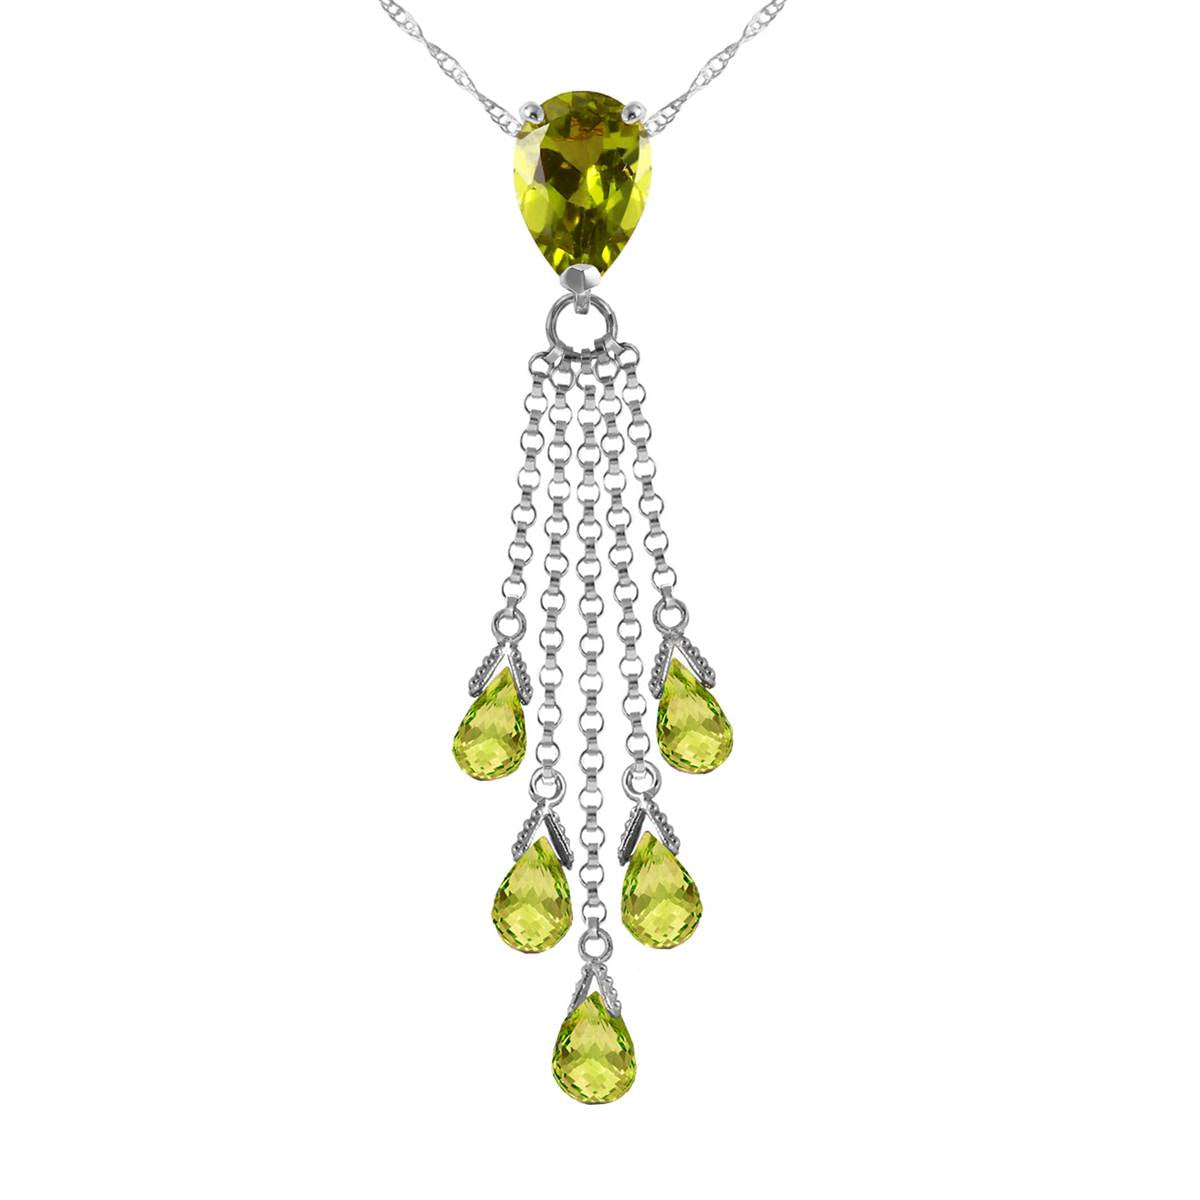 7.5 Carat 14K Solid White Gold Necklace Briolette Peridot